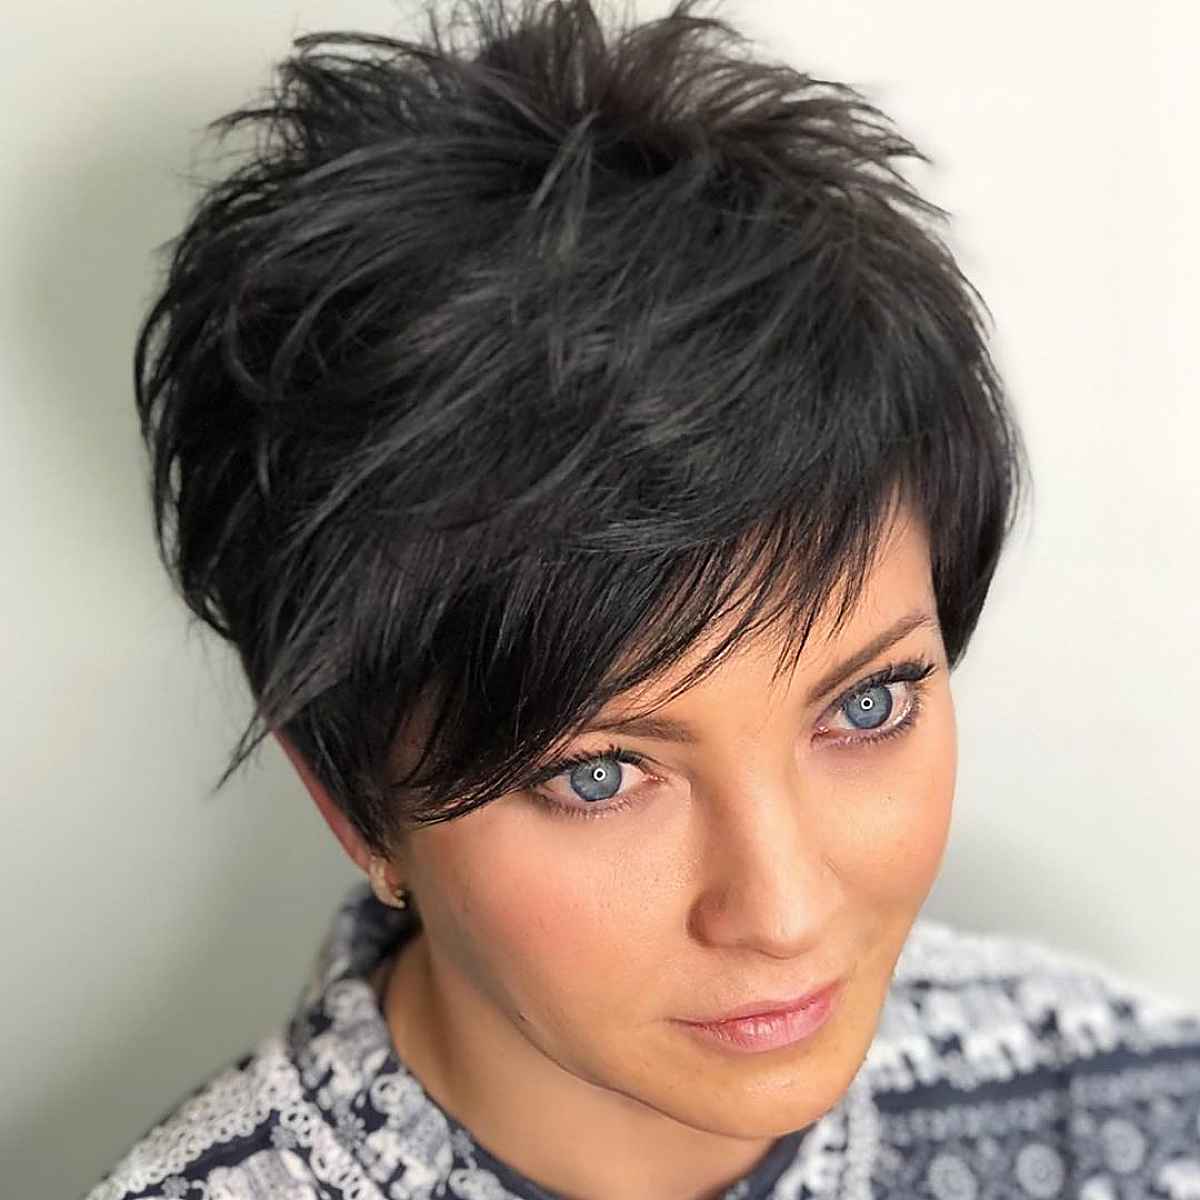 Spiky pixie with bangs